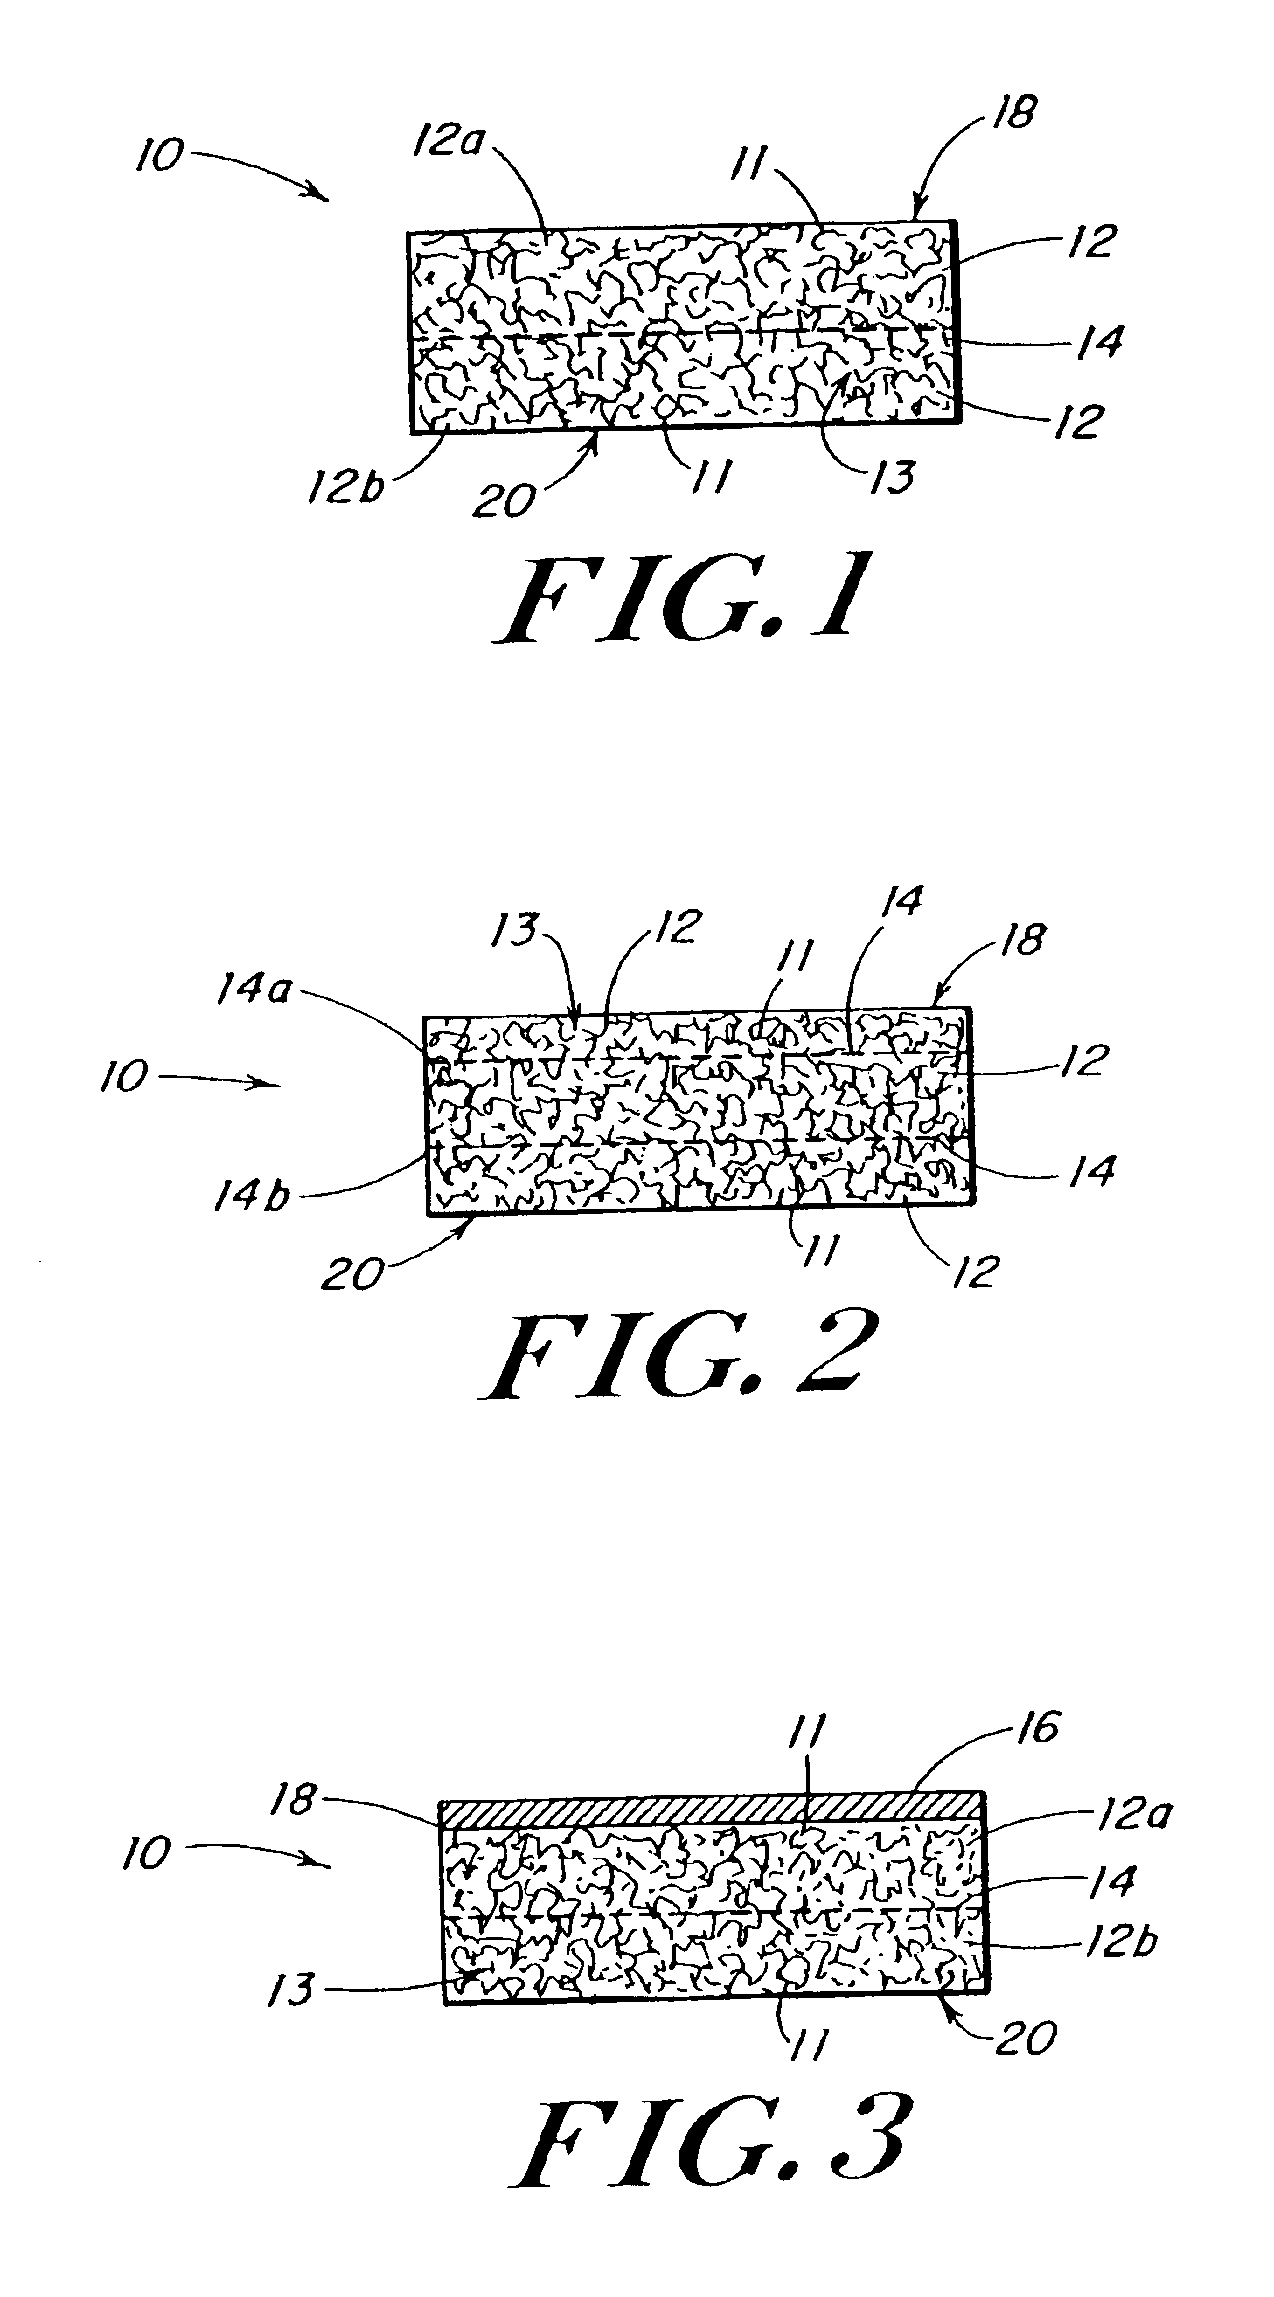 Use of reinforced foam implants with enhanced integrity for soft tissue repair and regeneration